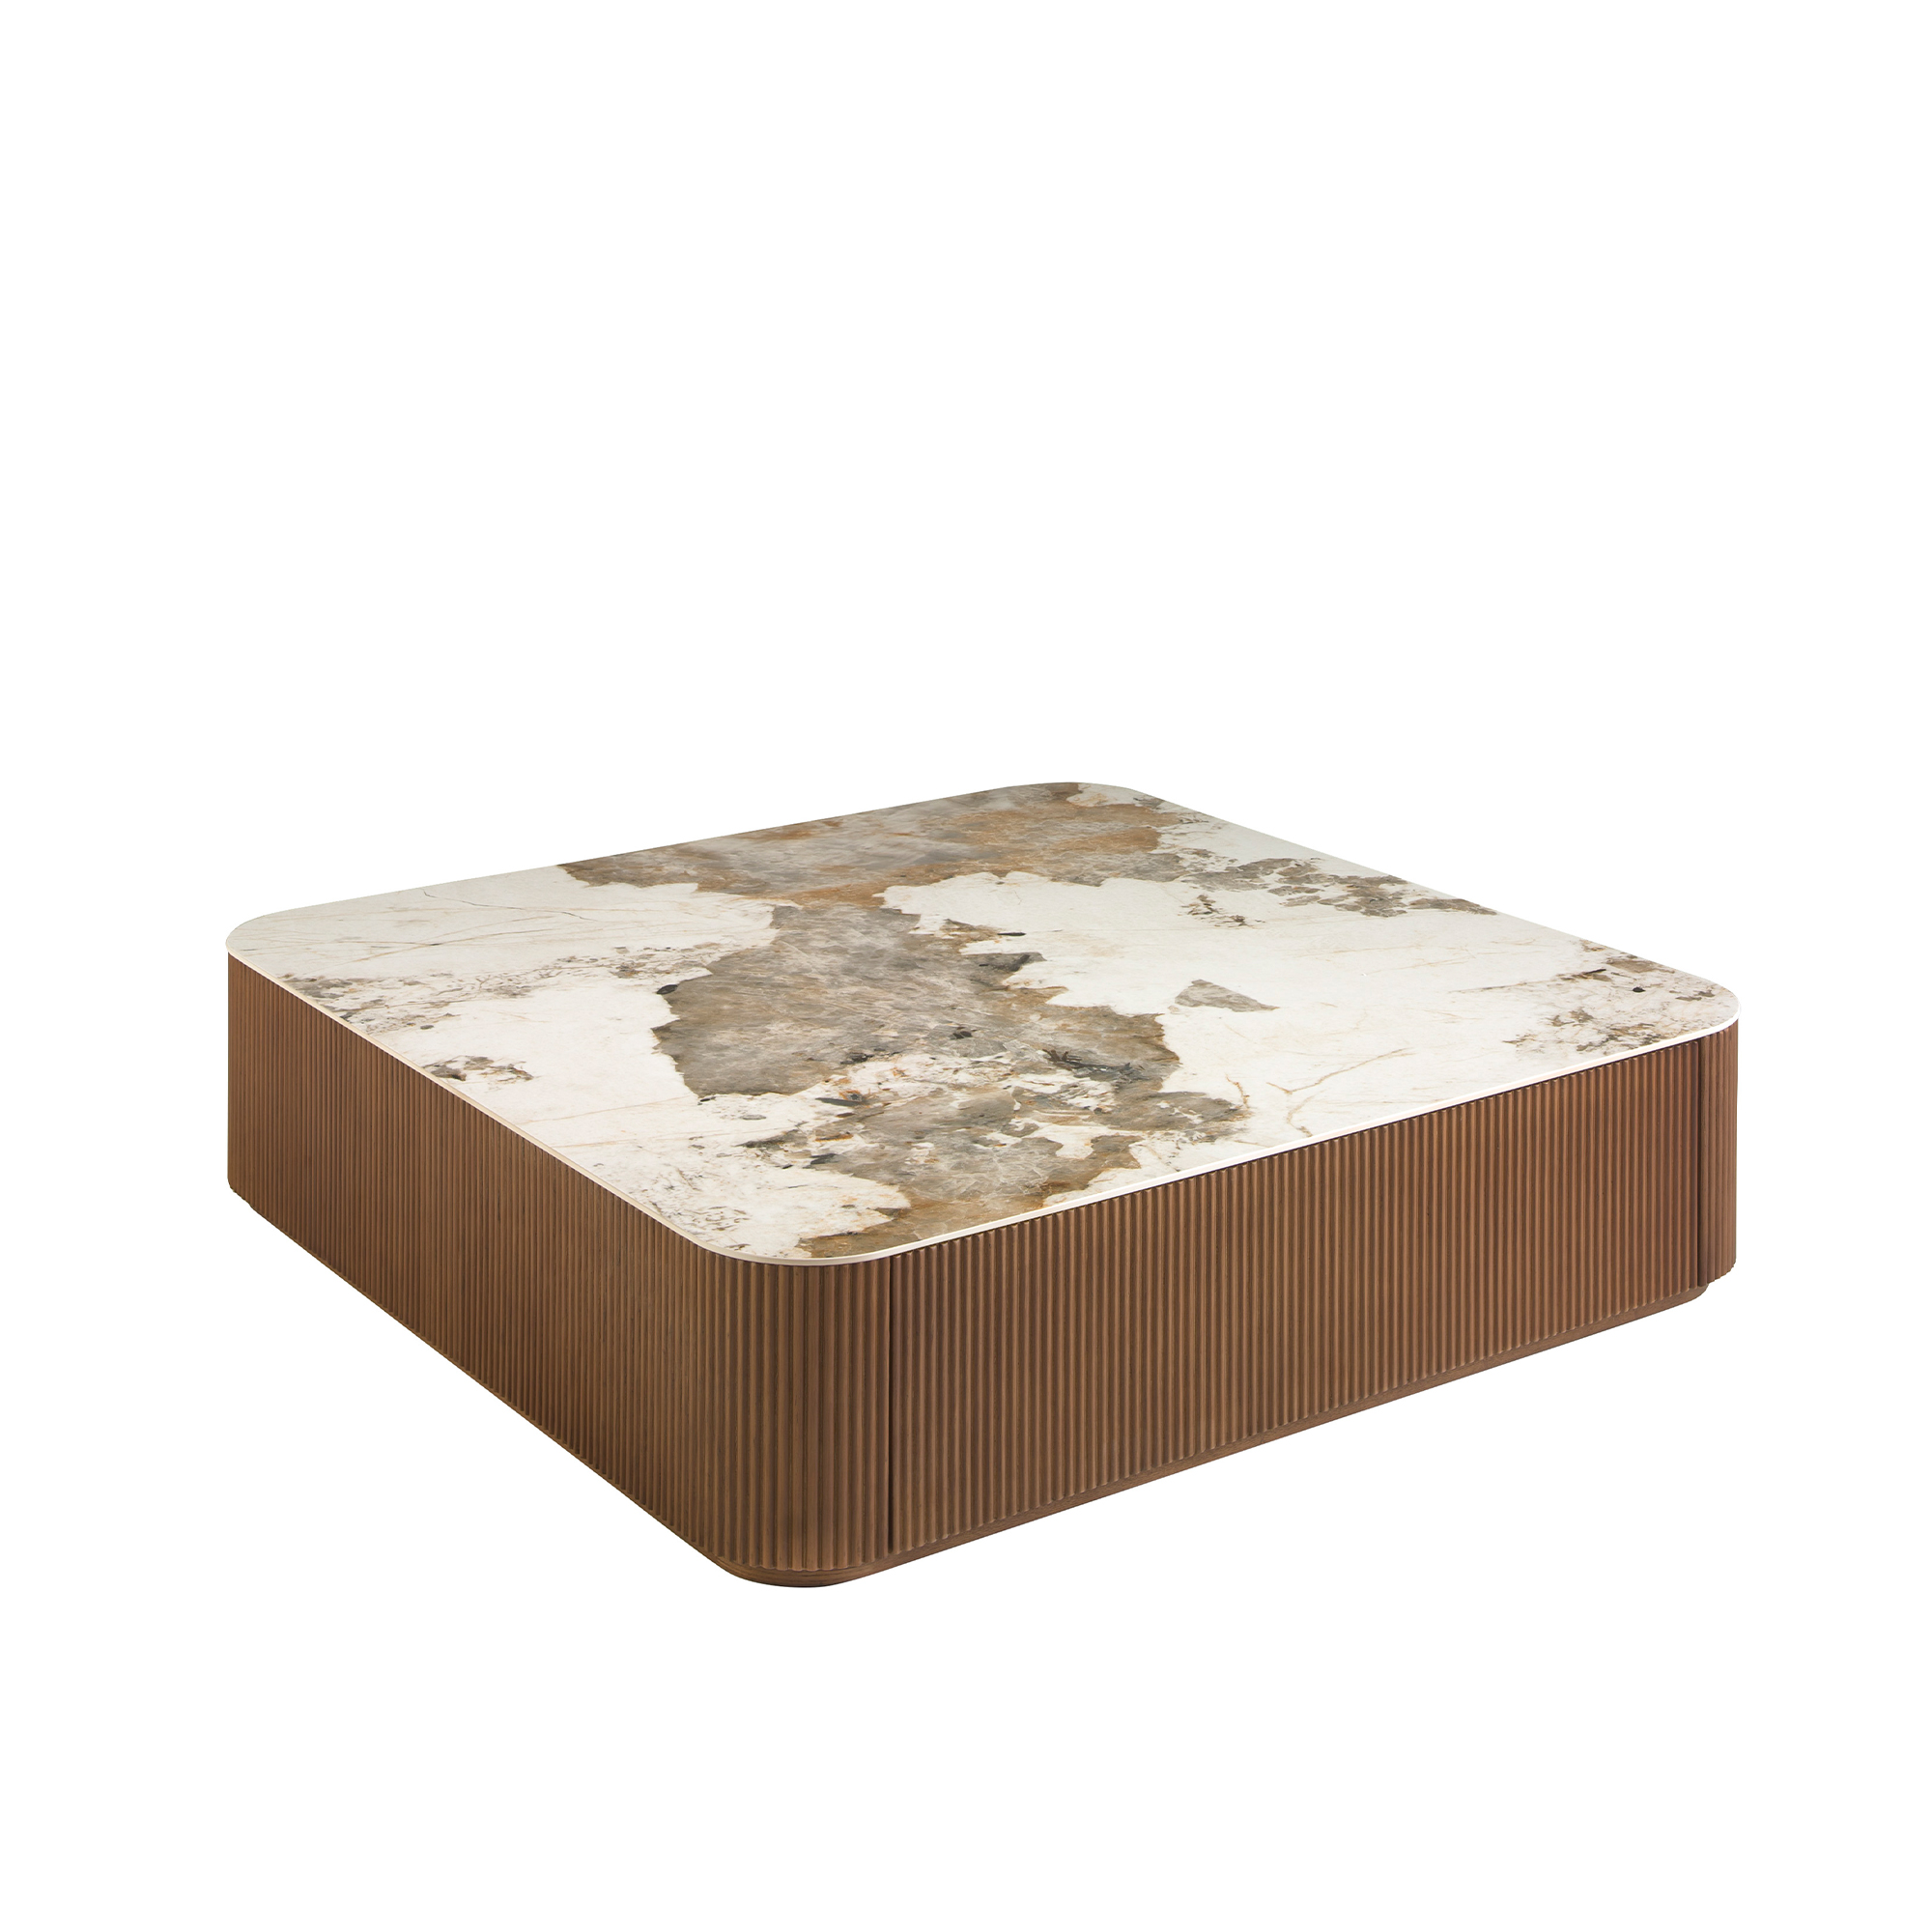 Porcelain marble and walnut square coffee table